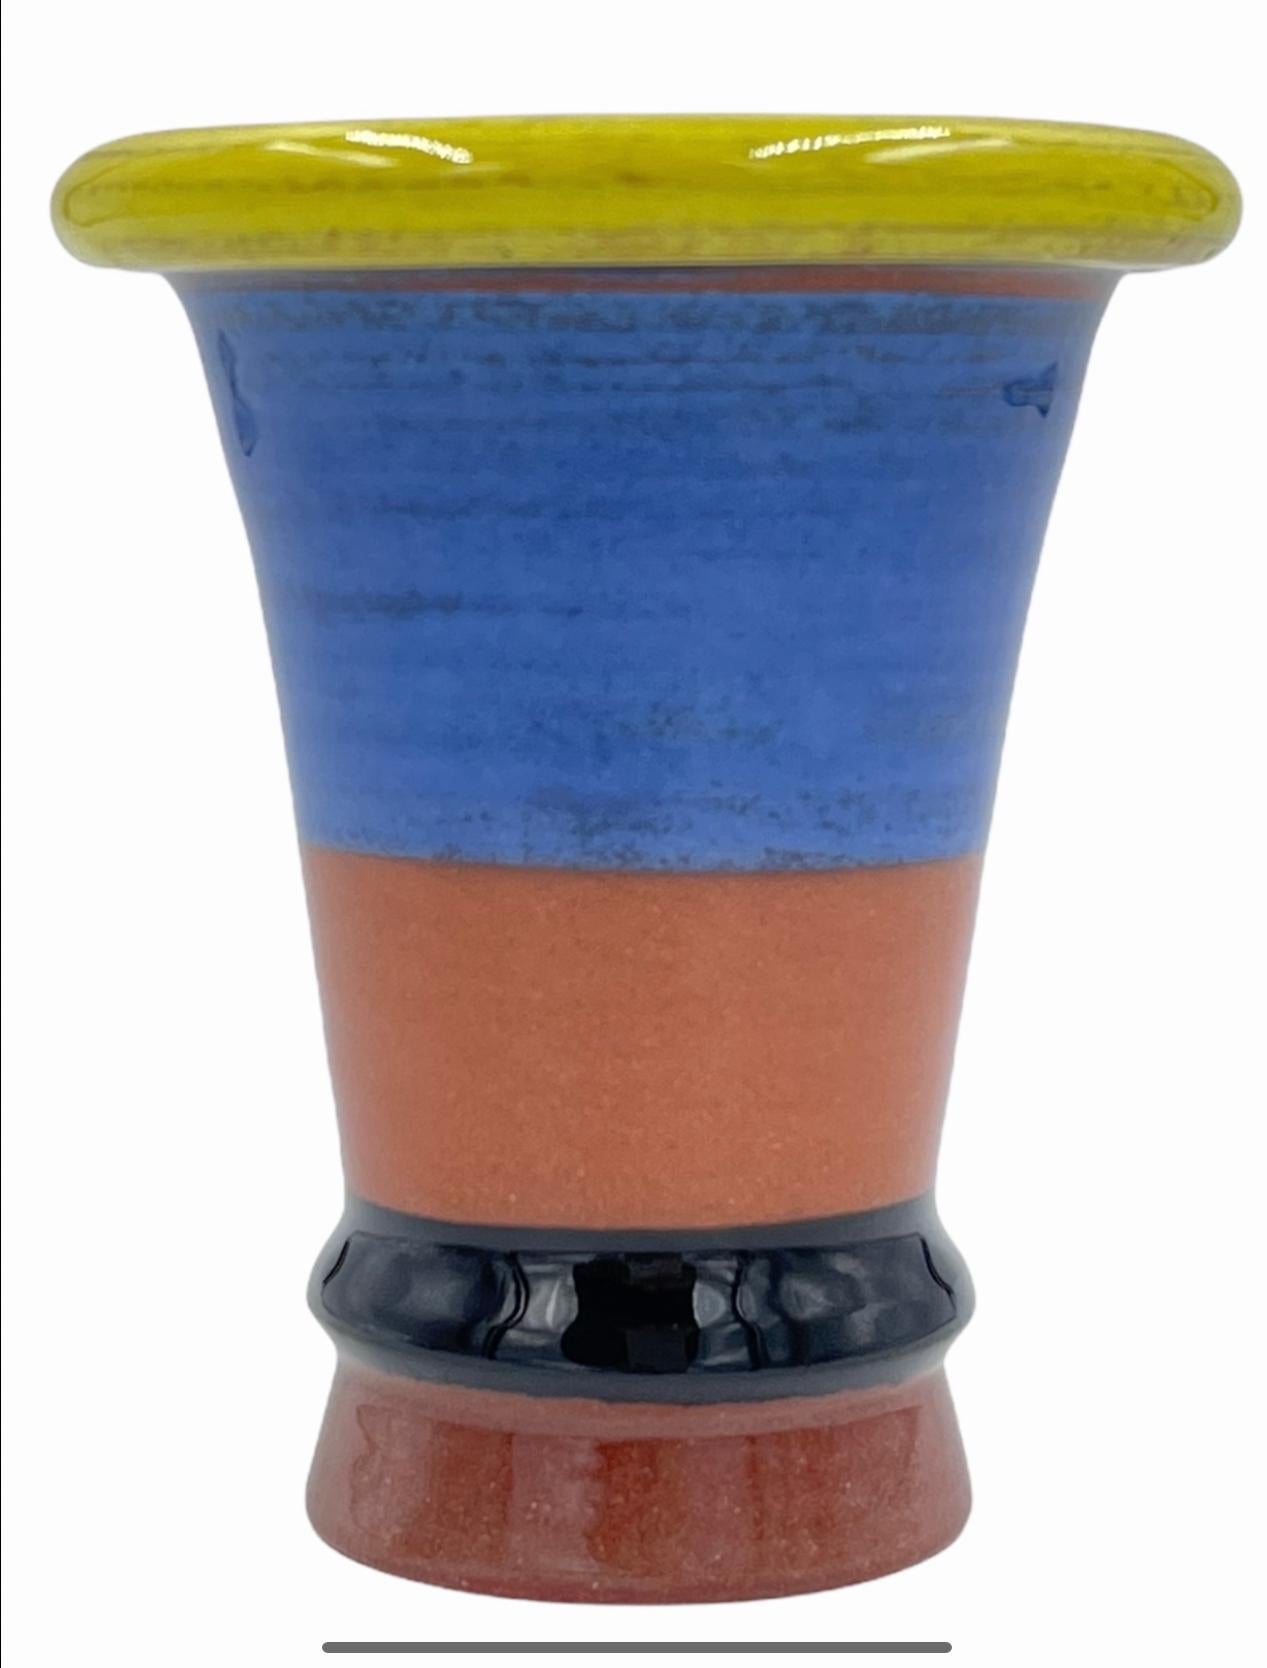 Expo vase 1997 in colors of yellow, blue, brick and black. Peter Shire, a founding member of Sottsass' Memphis Milano Group is an LA-based artist whose work eludes all attempts at categorization. He has created ceramics, furniture, toys, interior